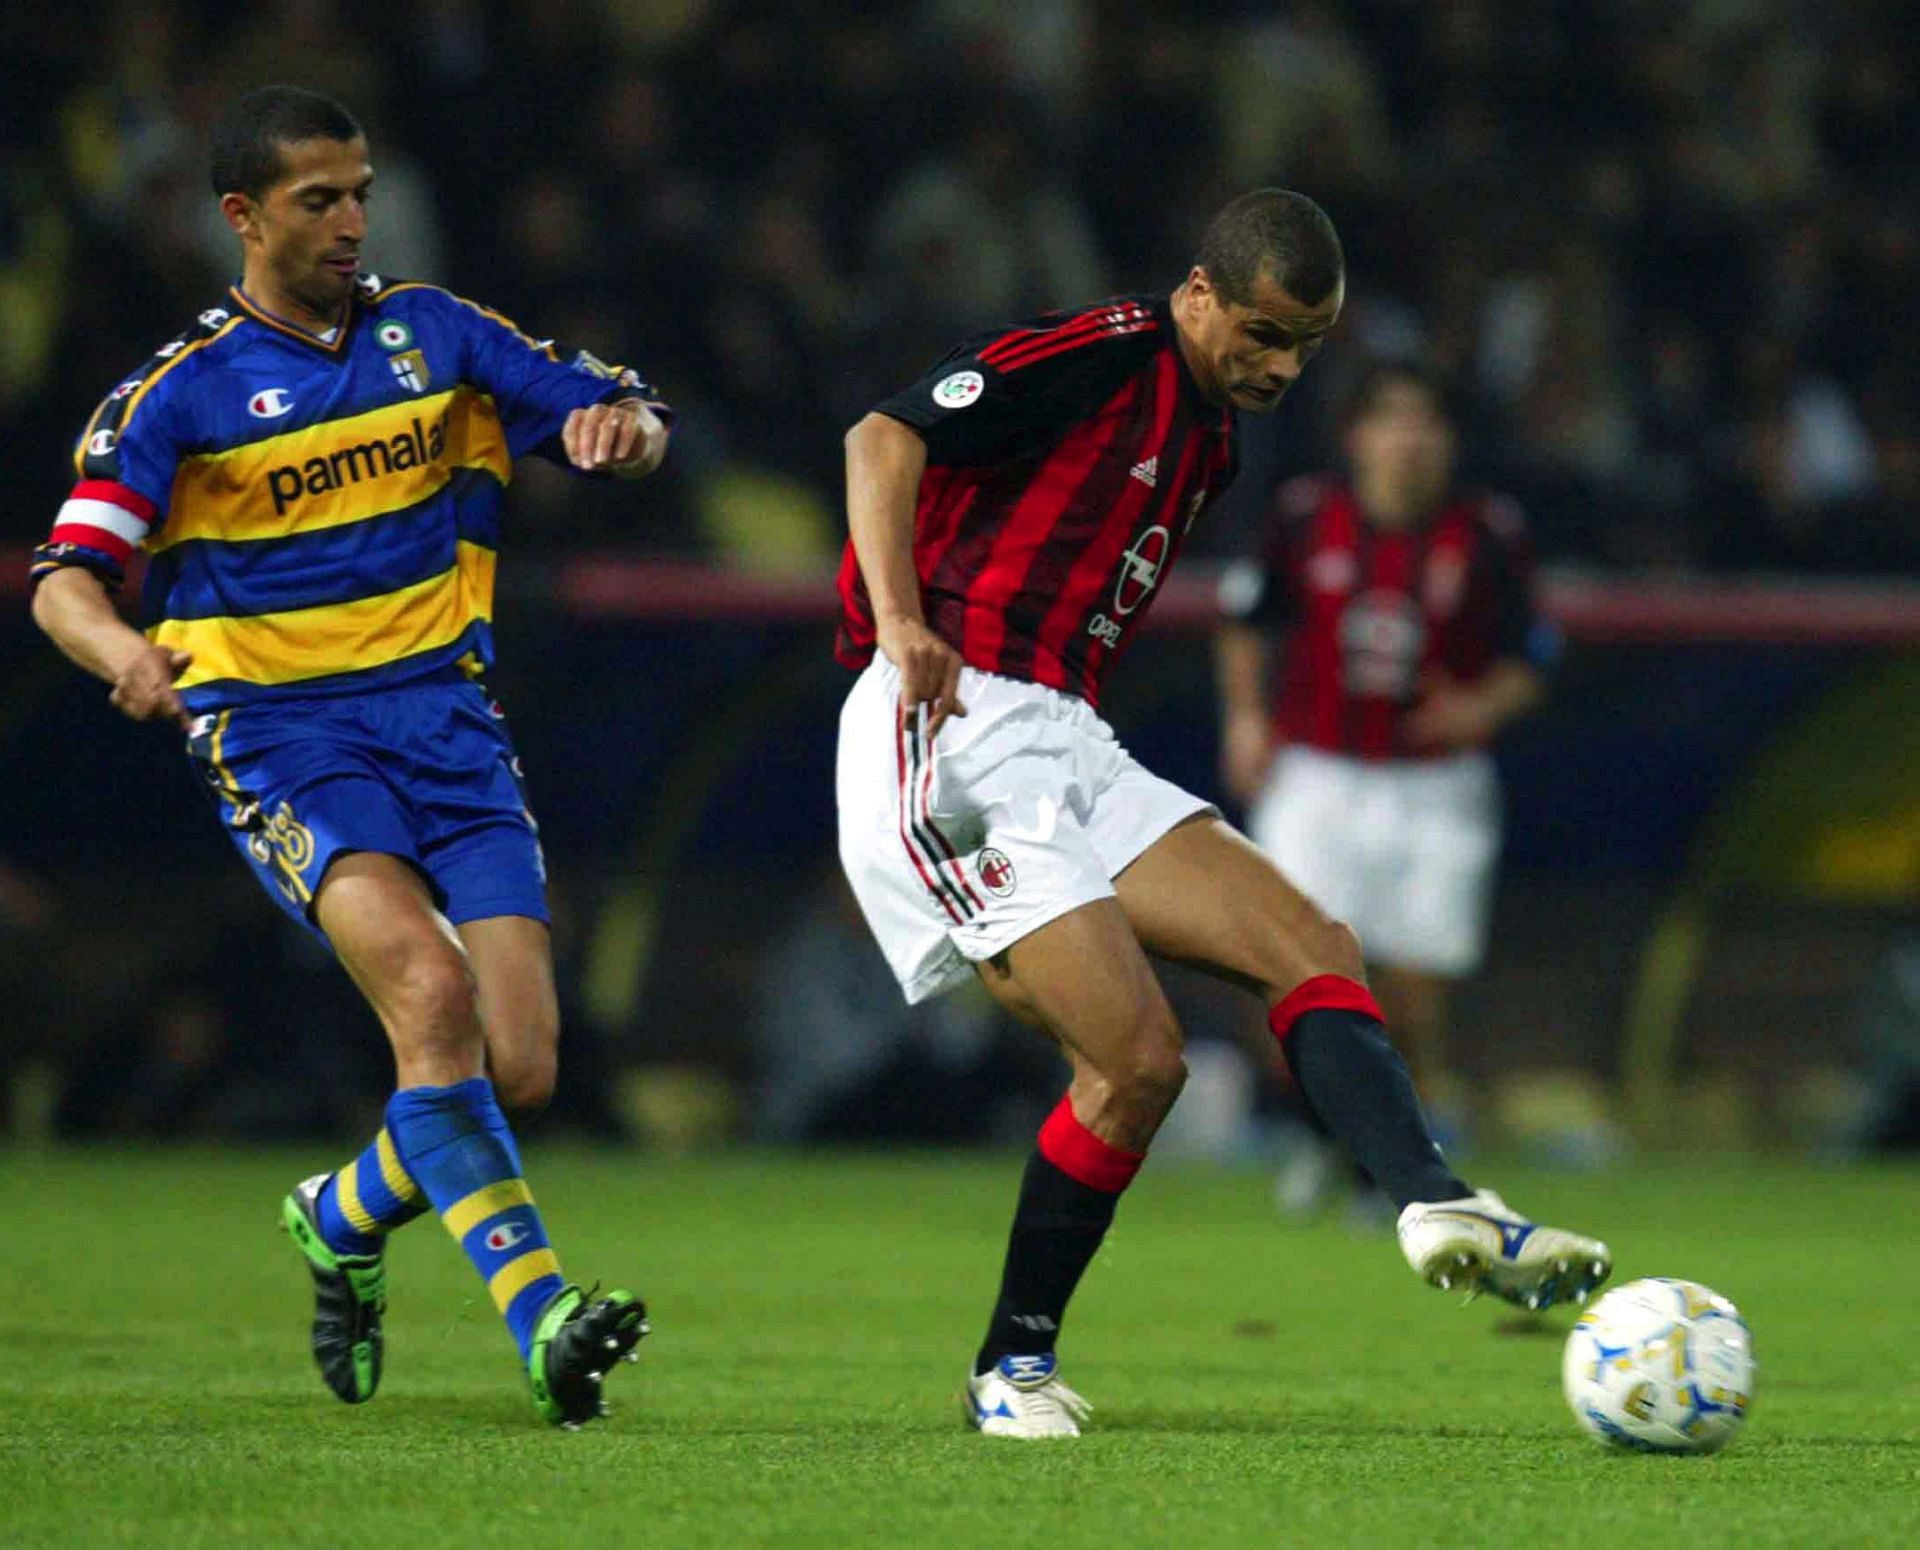 The great Rivaldo of AC Milan in action